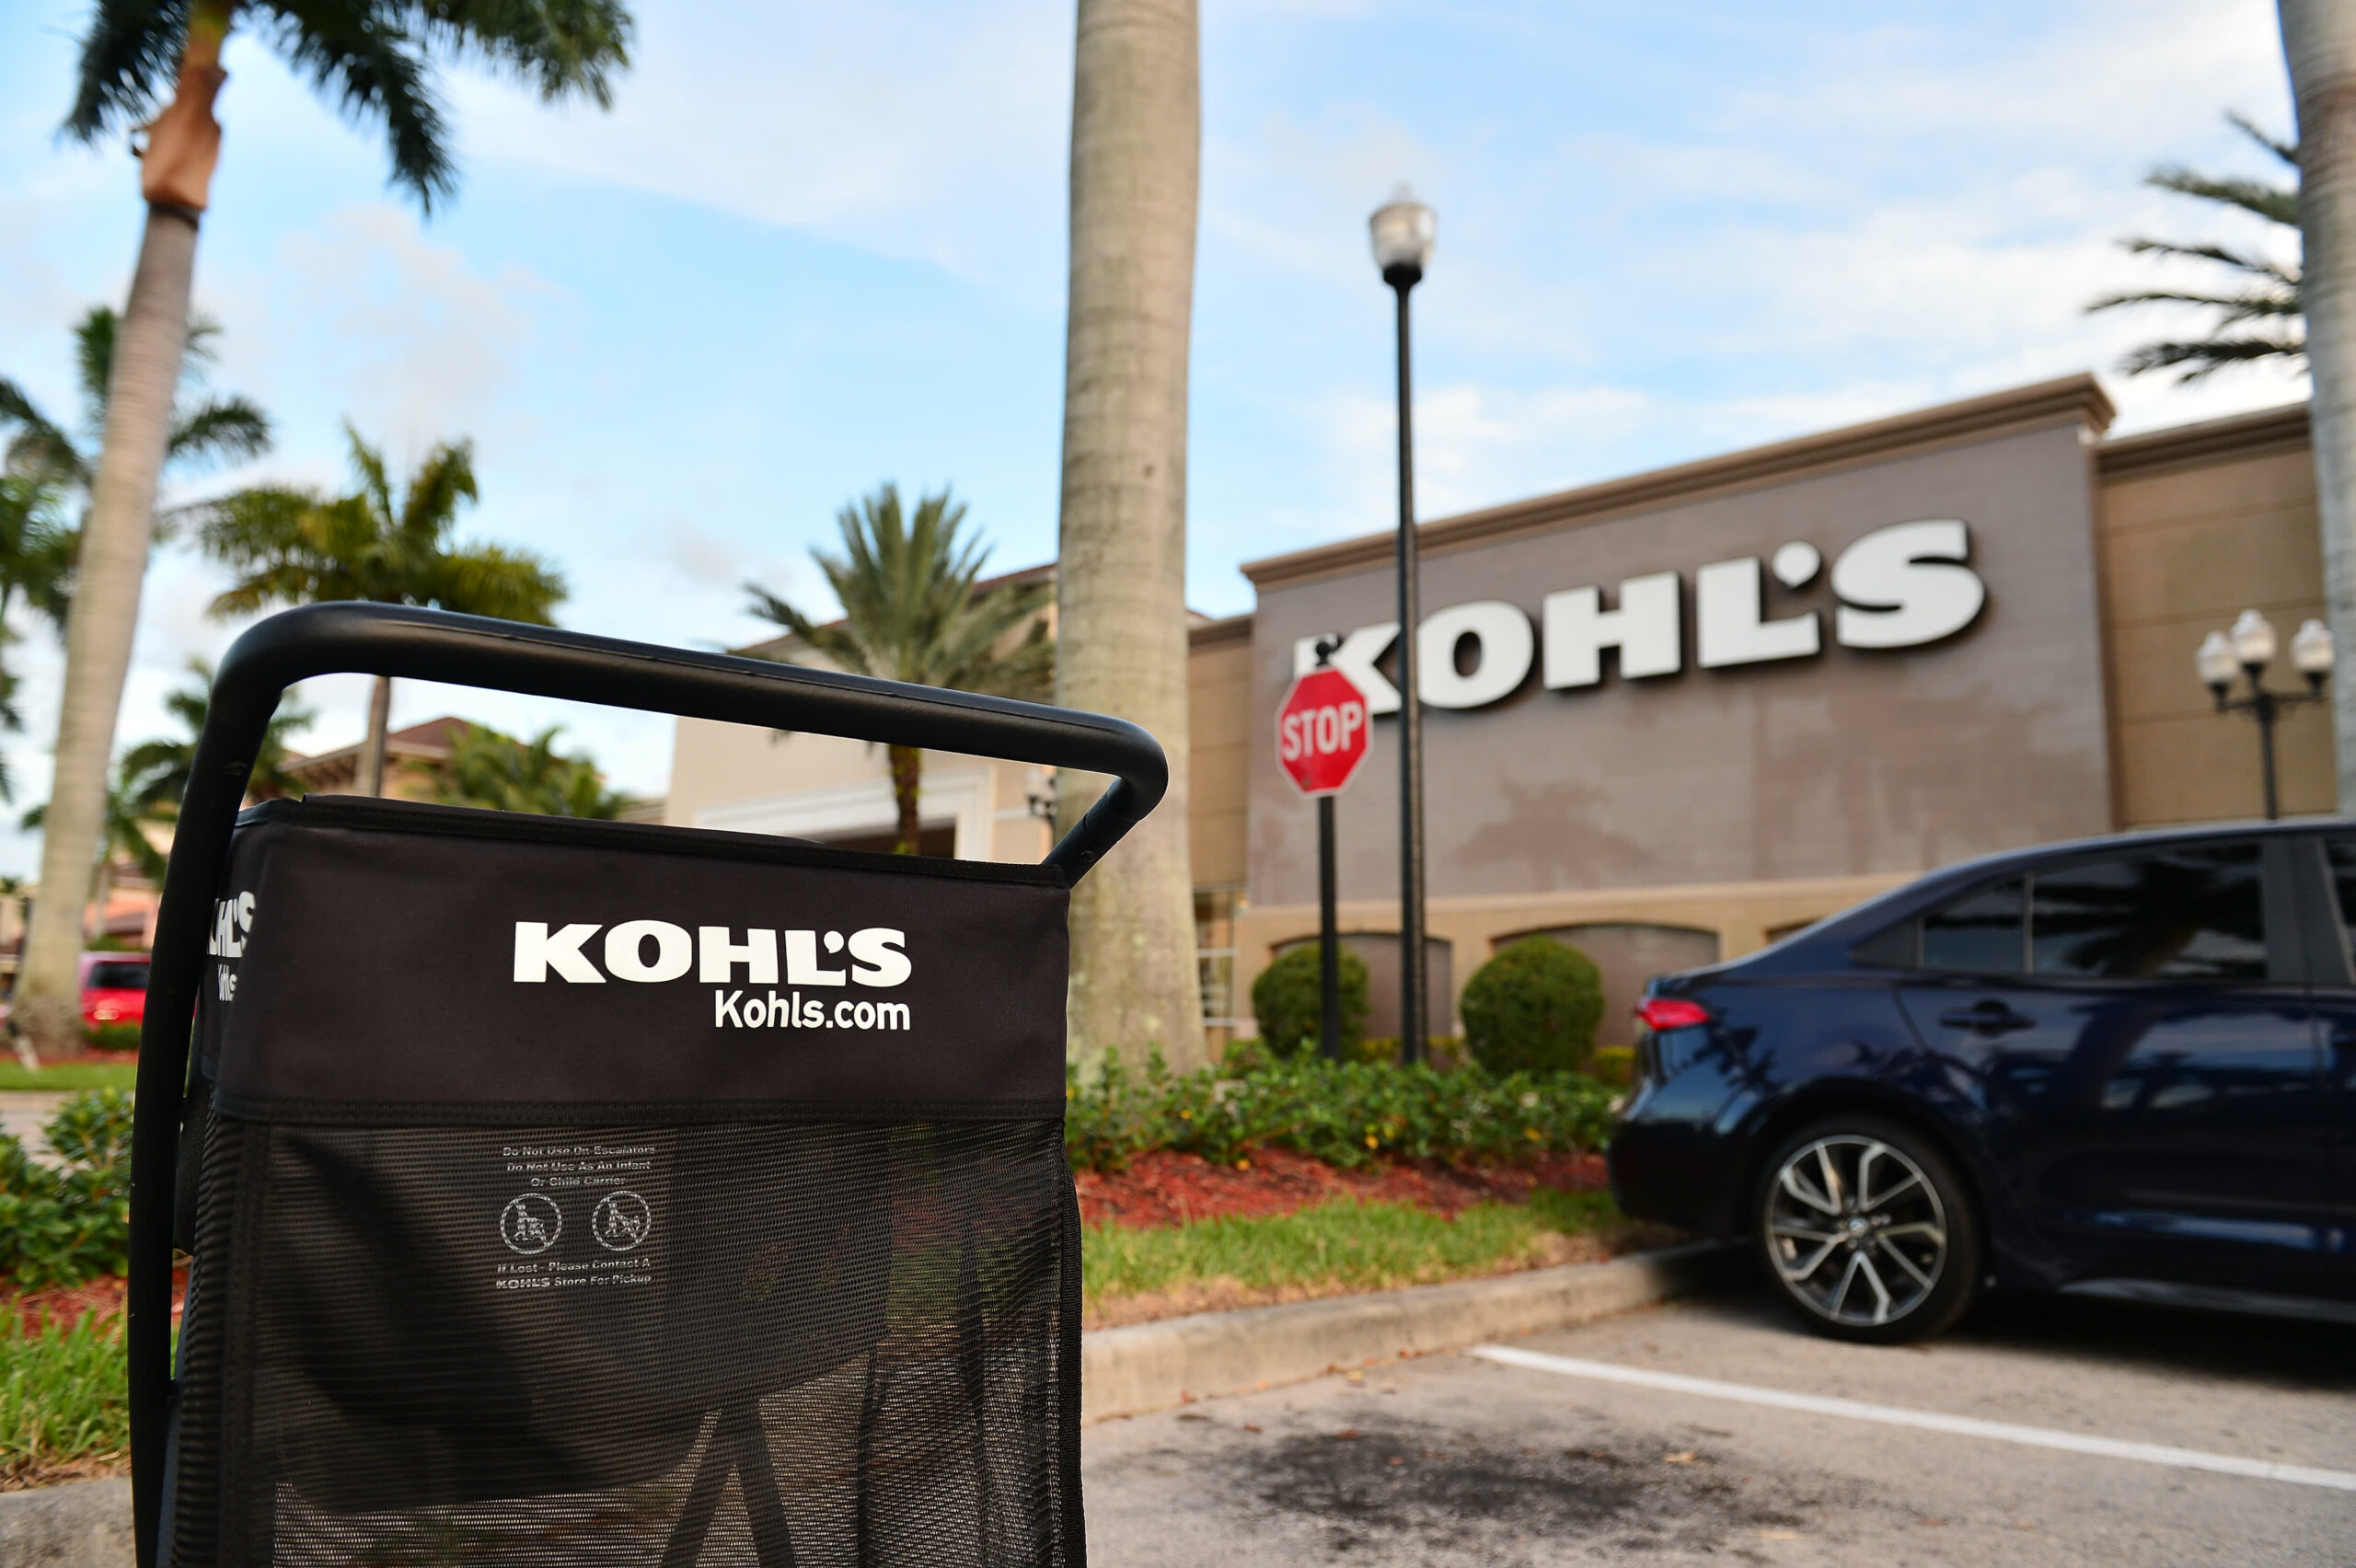 Behind the marketing campaign forcing modifications at Kohl’s